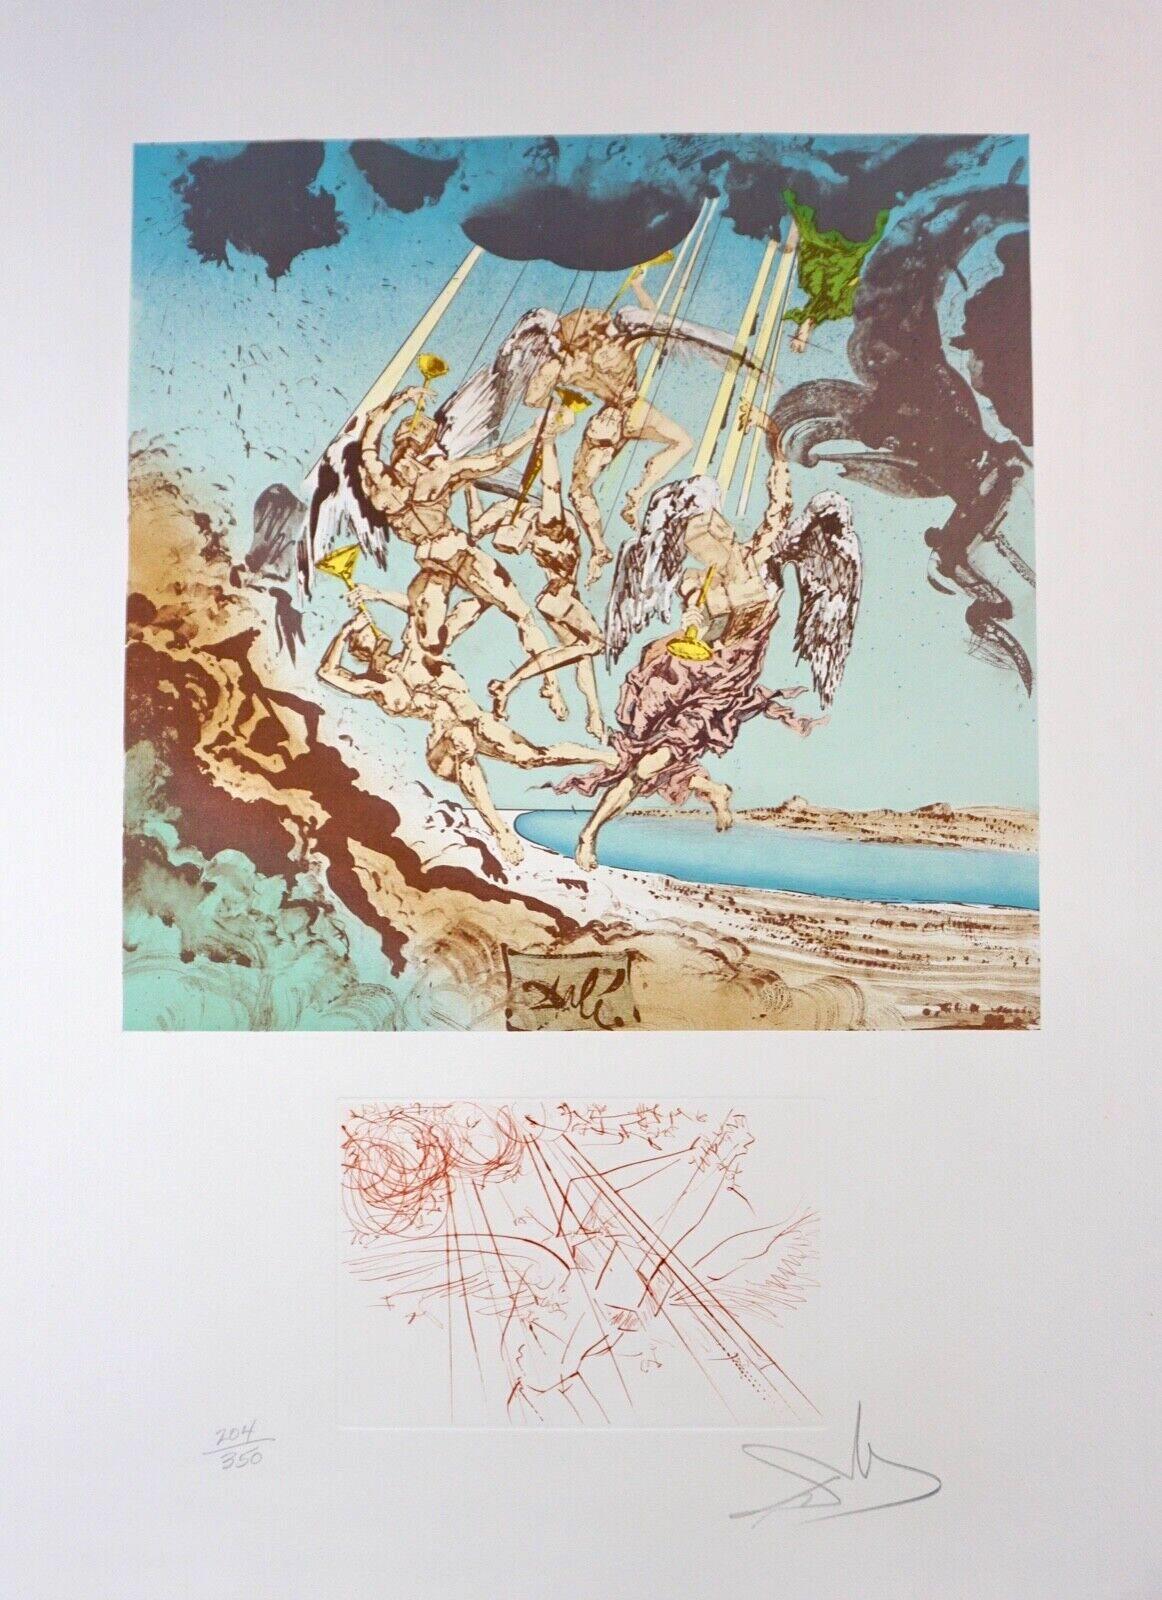 ARTIST: Salvador Dali

TITLE: Hommage a Homere Suite
Helen of Troy
Return of Ulysses

MEDIUM: 2 Etchings

SIGNED: Both etchings are Hand Signed 

EDITION NUMBER:  204/350 matched numbered

MEASUREMENTS: Helen of Troy 21.37